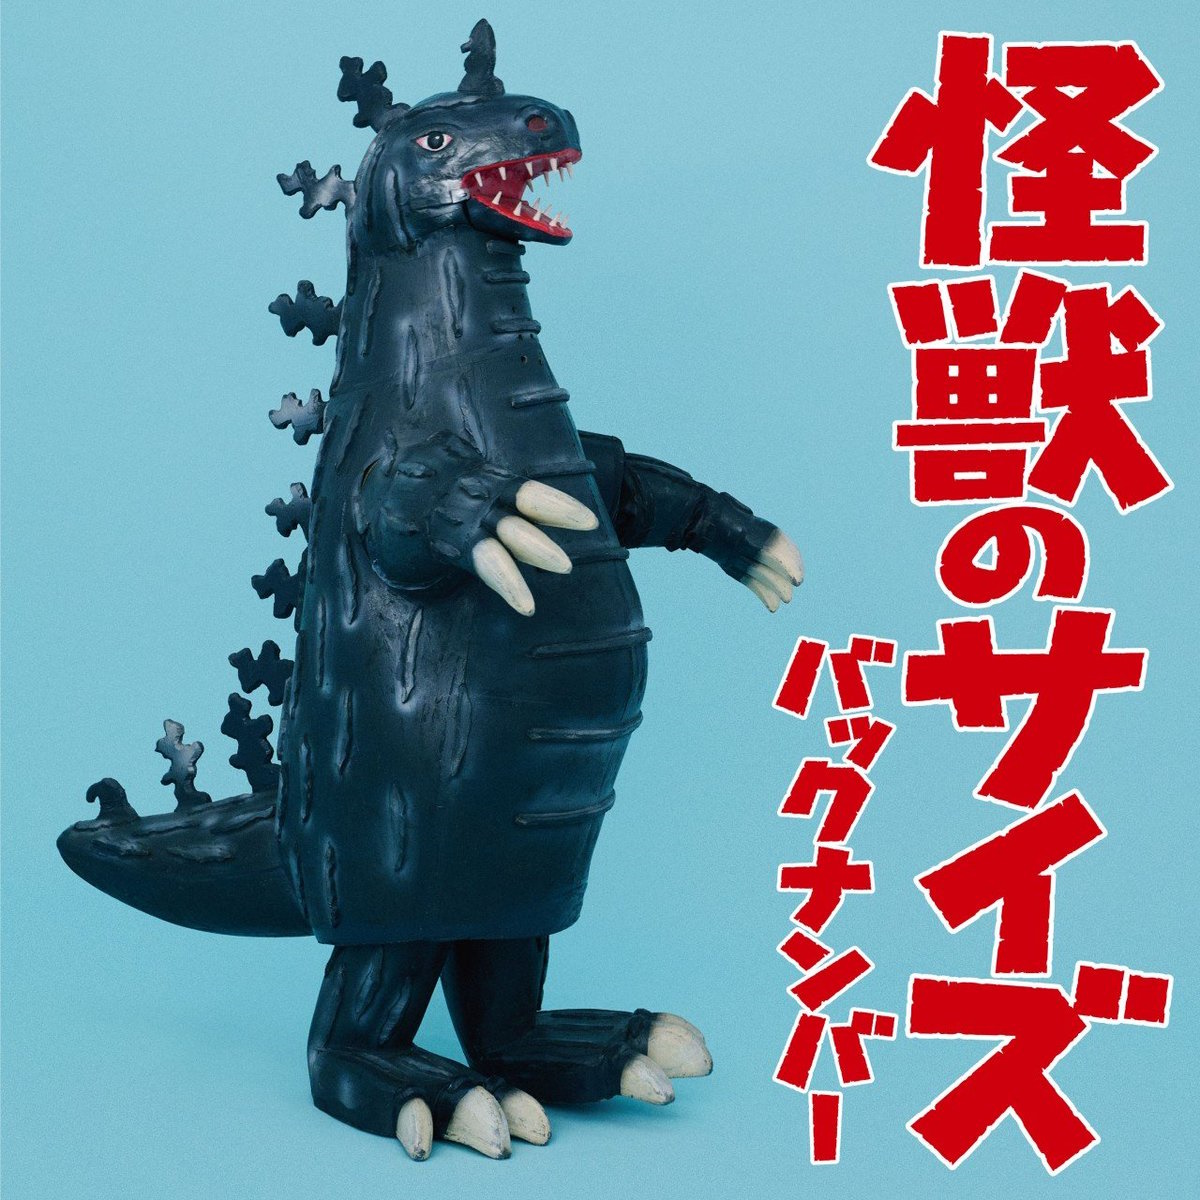 Cover art for『back number - Size of the Kaiju』from the release『Kaijuu no Size』